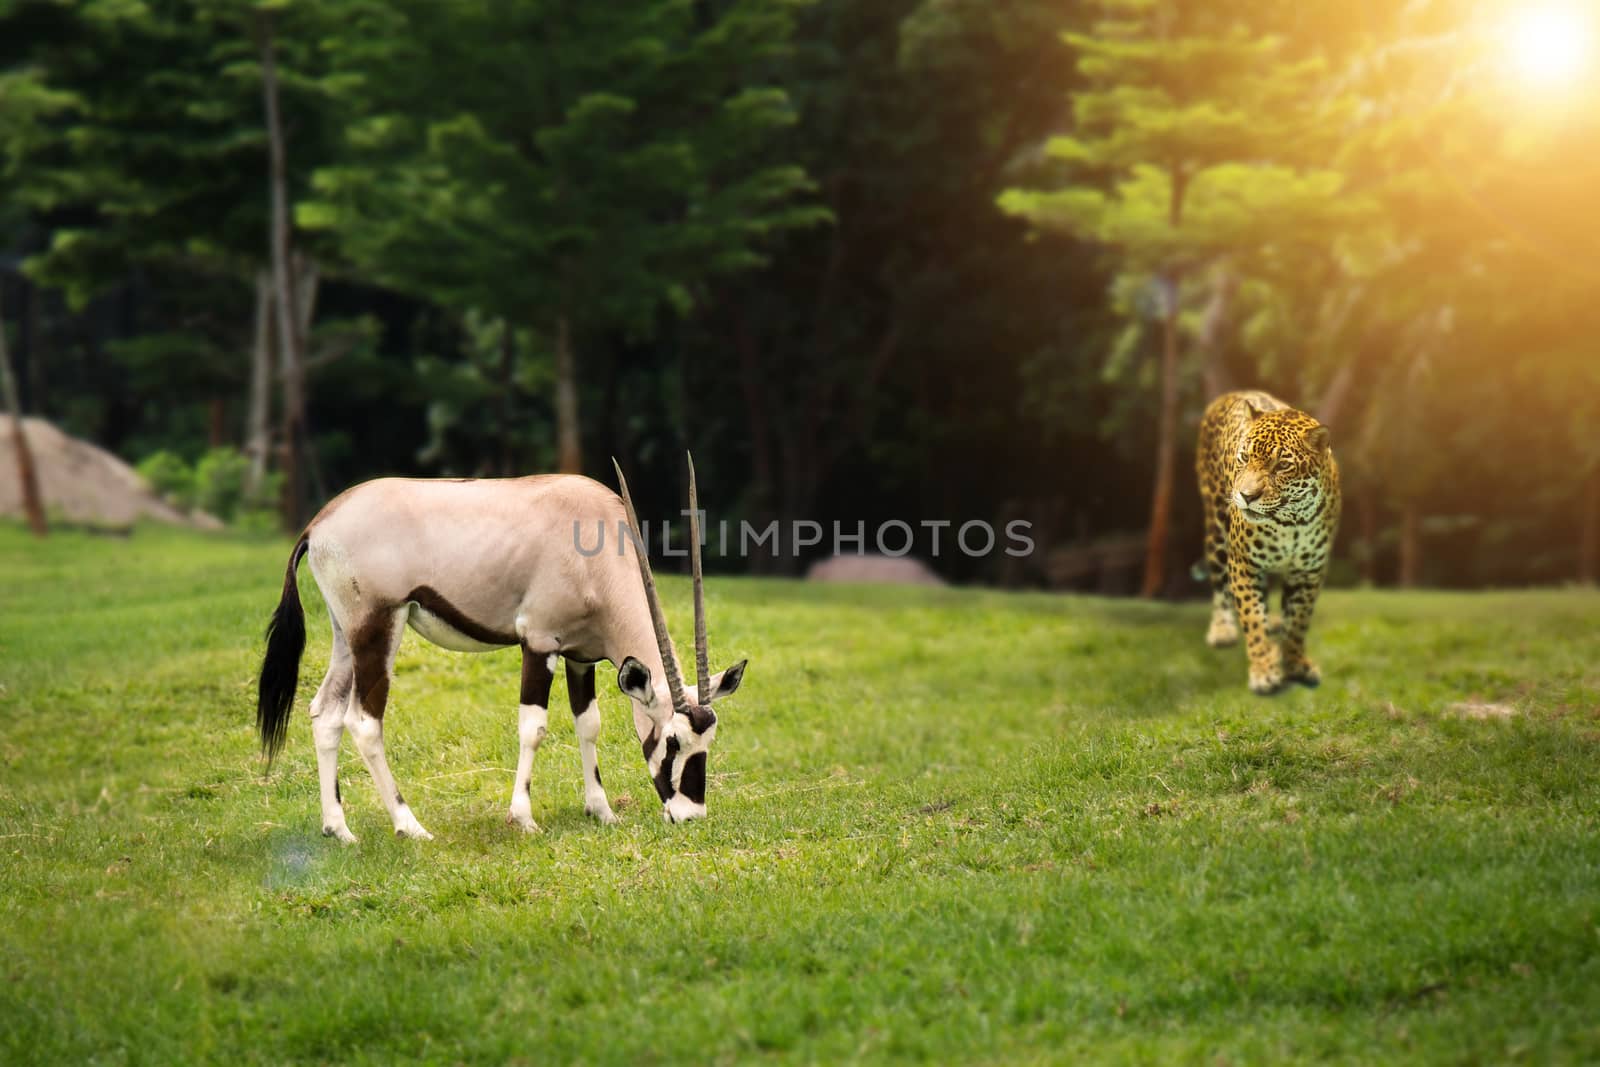 Animal wild life hunting food chain concept : leopard looking at Gemsbok (Gemsbuck) at green forest by asiandelight